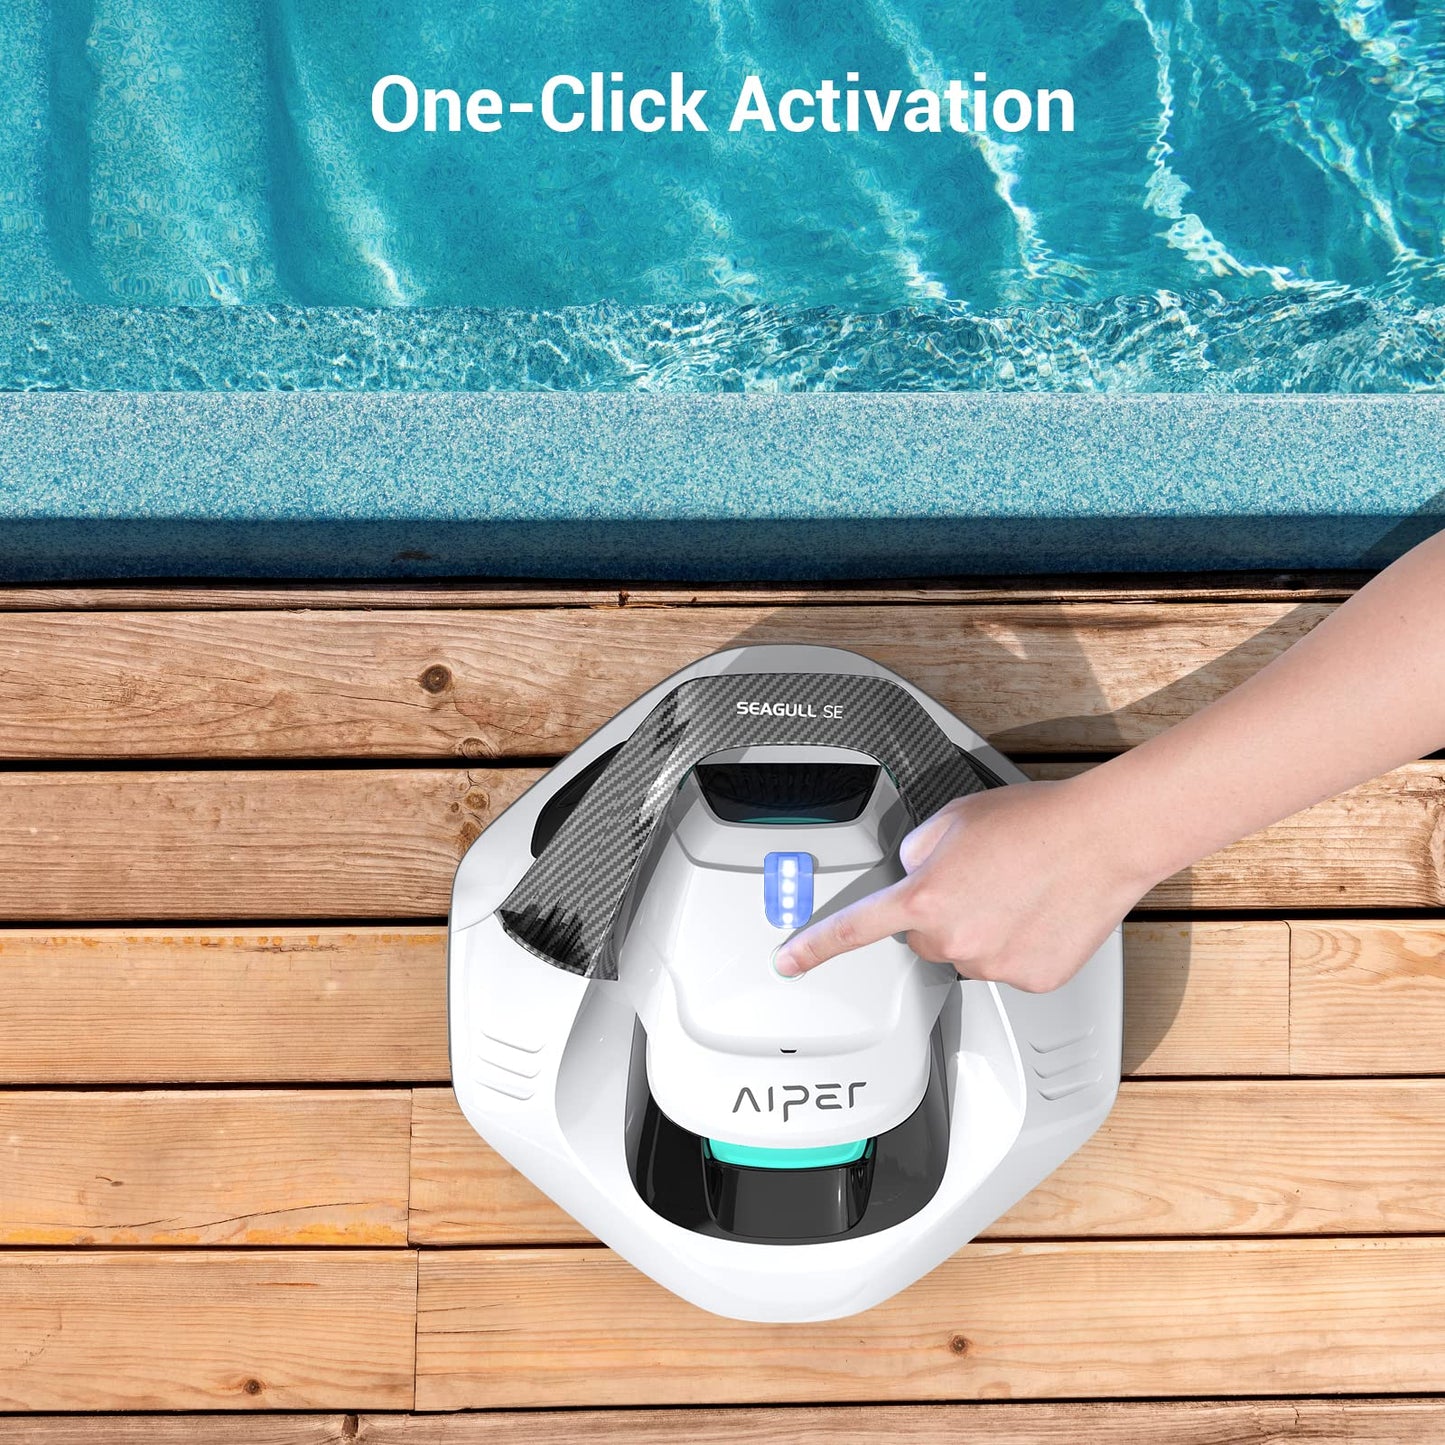 AIPER Cordless Robotic Pool Cleaner, Pool Vacuum with Dual-Drive Motors, Self-Parking Technology, Lightweight, Perfect for Above-Ground/In-Ground Flat Pools up to 40 Feet (Lasts 90 Mins) White